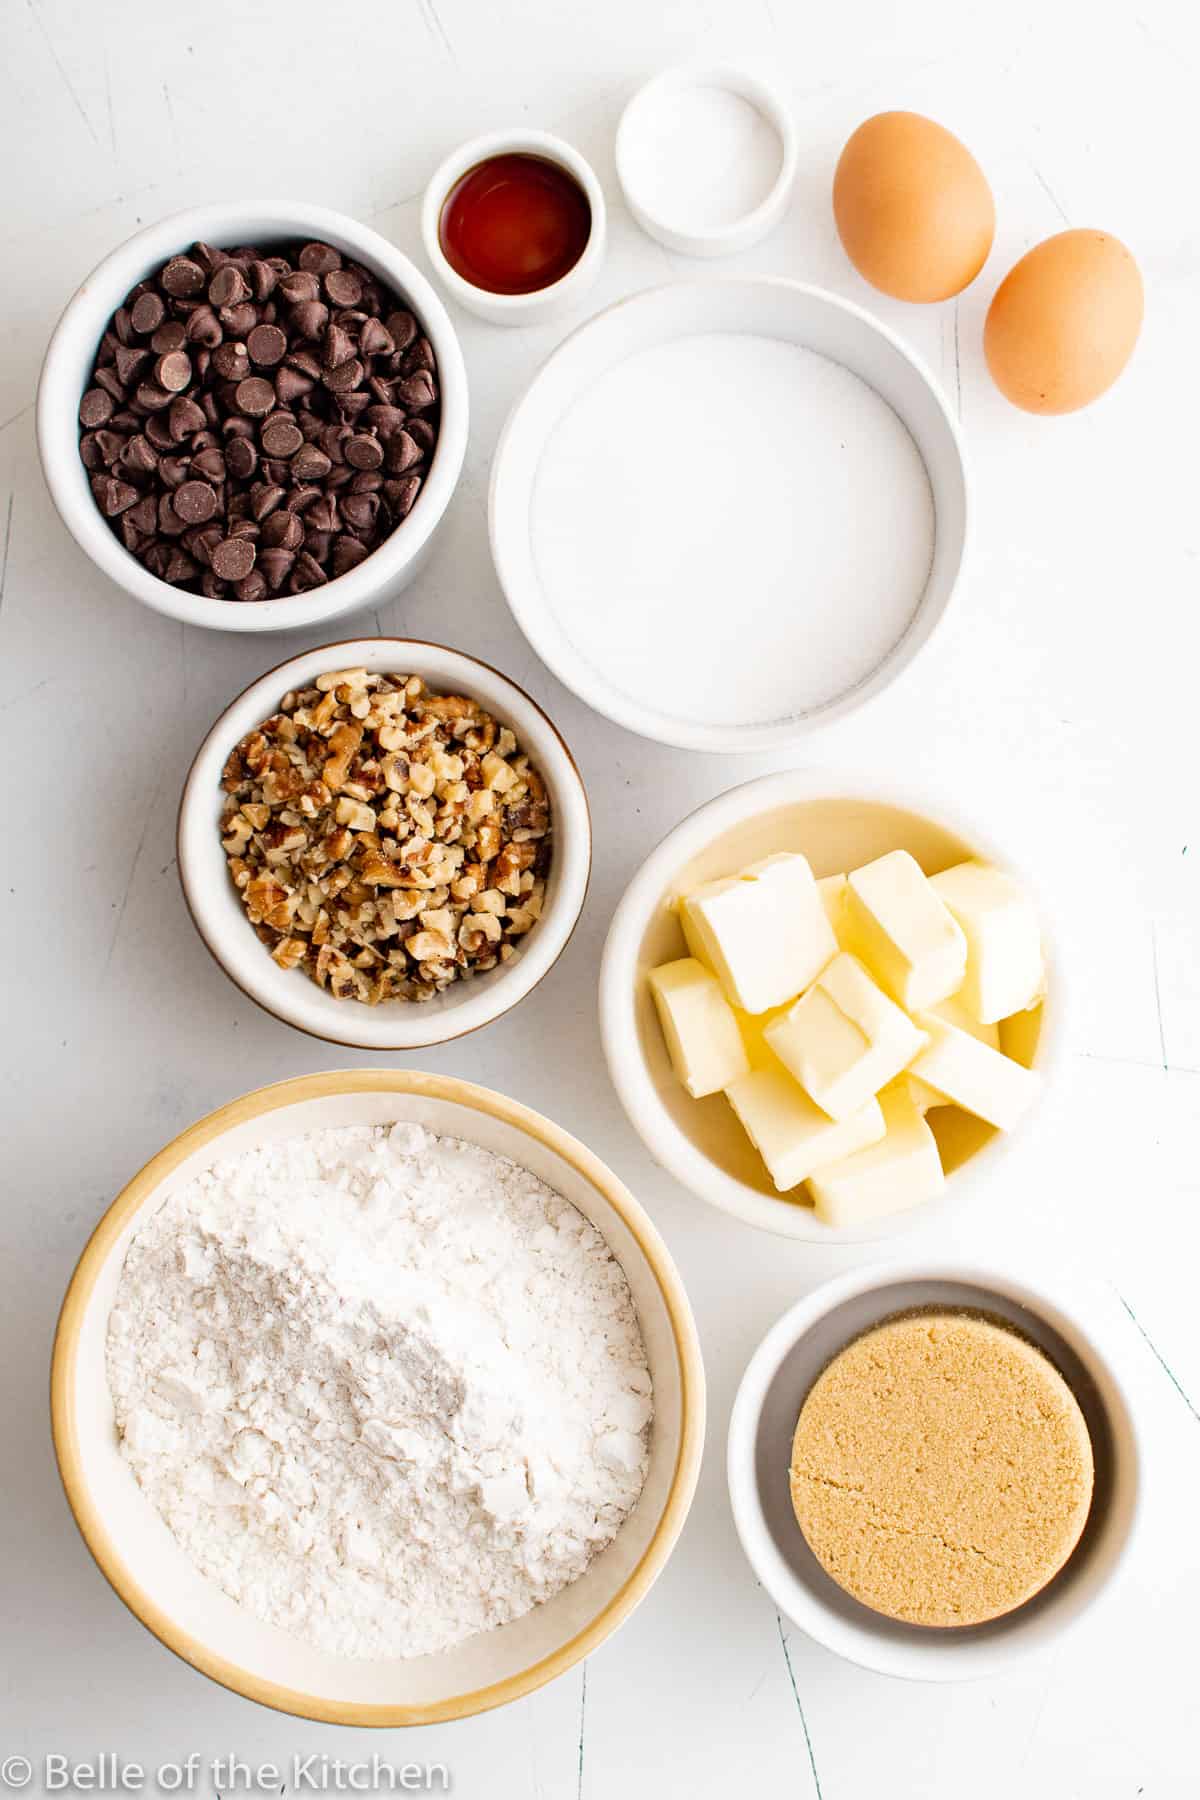 ingredients in bowls on a counter top.